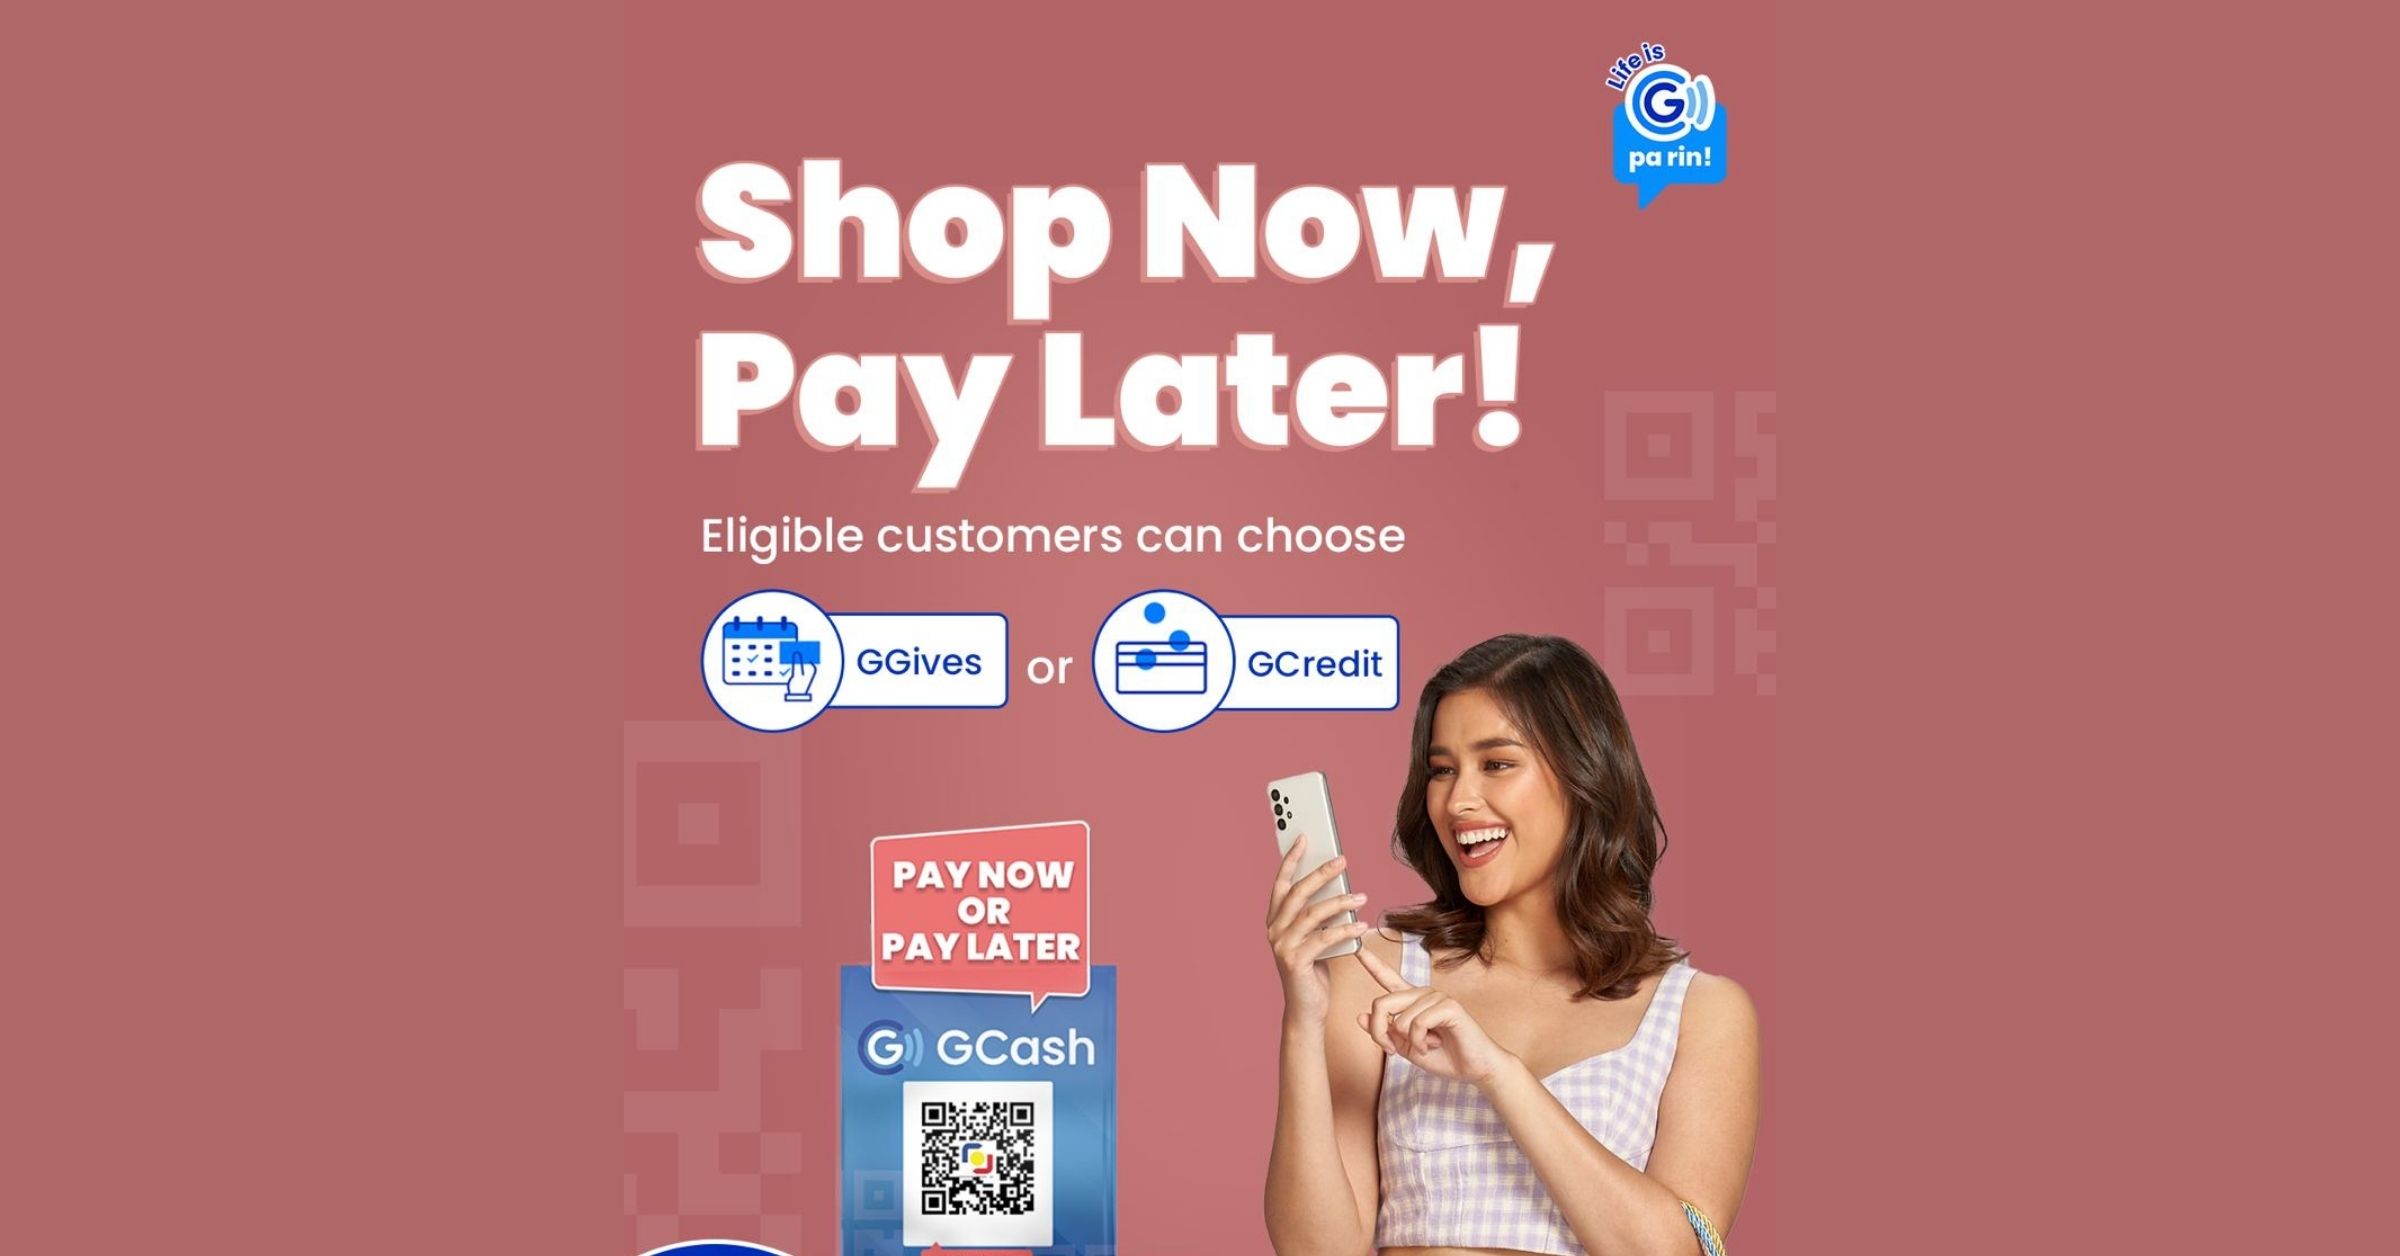 Shop now and pay later using the GCash QR Code